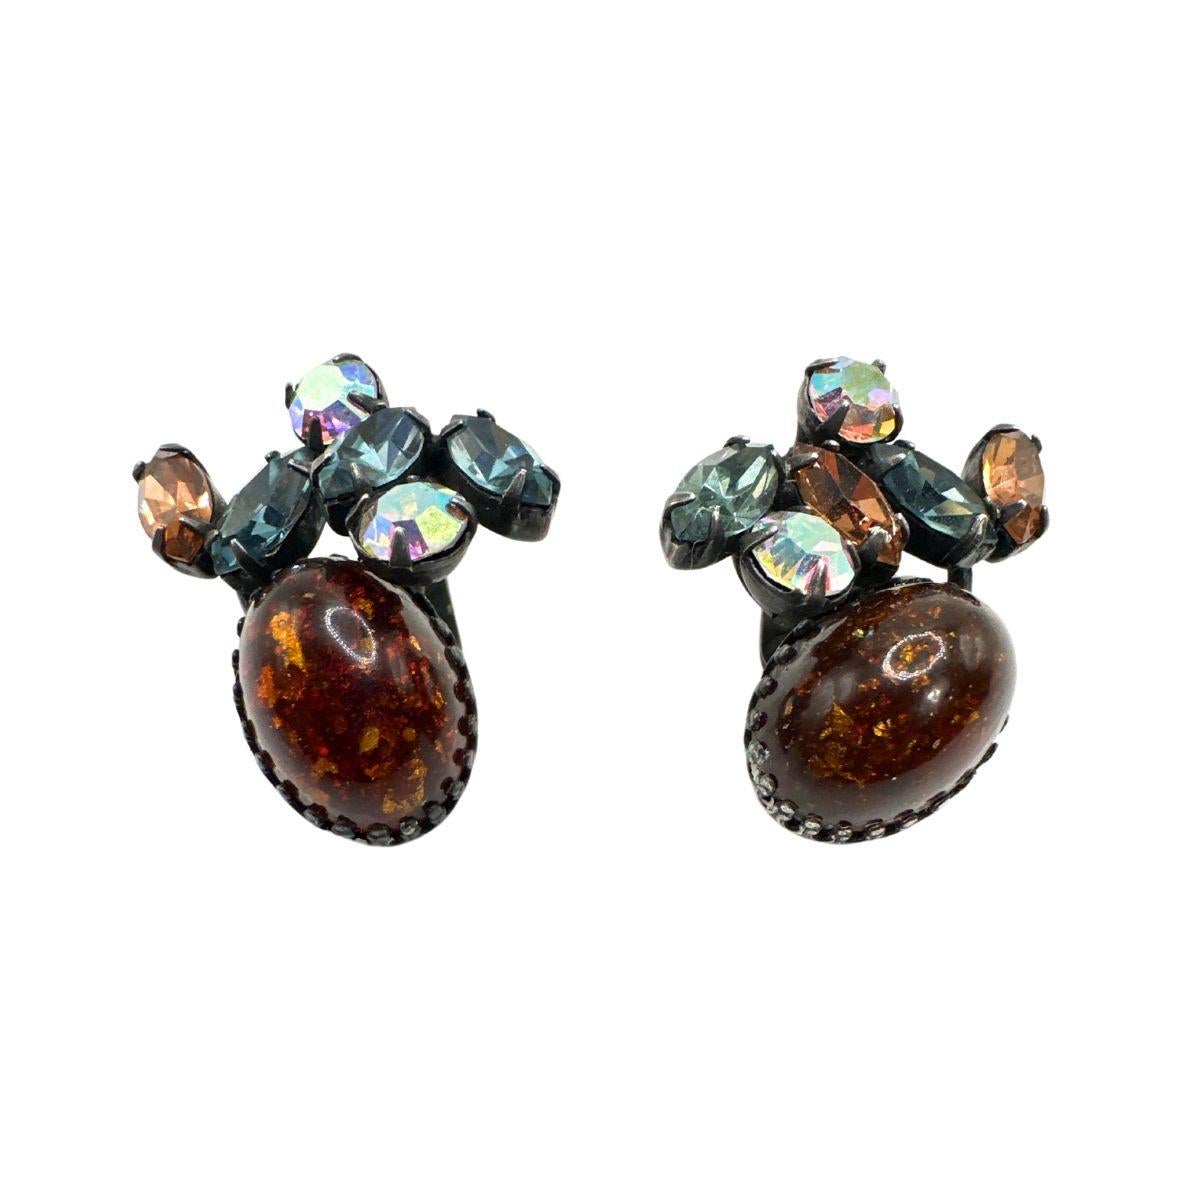 Earring Length: 1:26

Bin Code: E23 / P2

Step back in time with these exquisite Signed Weiss Vintage Multi-Color Glass and Rhinestone Earrings. Crafted with meticulous attention to detail, these earrings showcase a stunning combination of vibrant